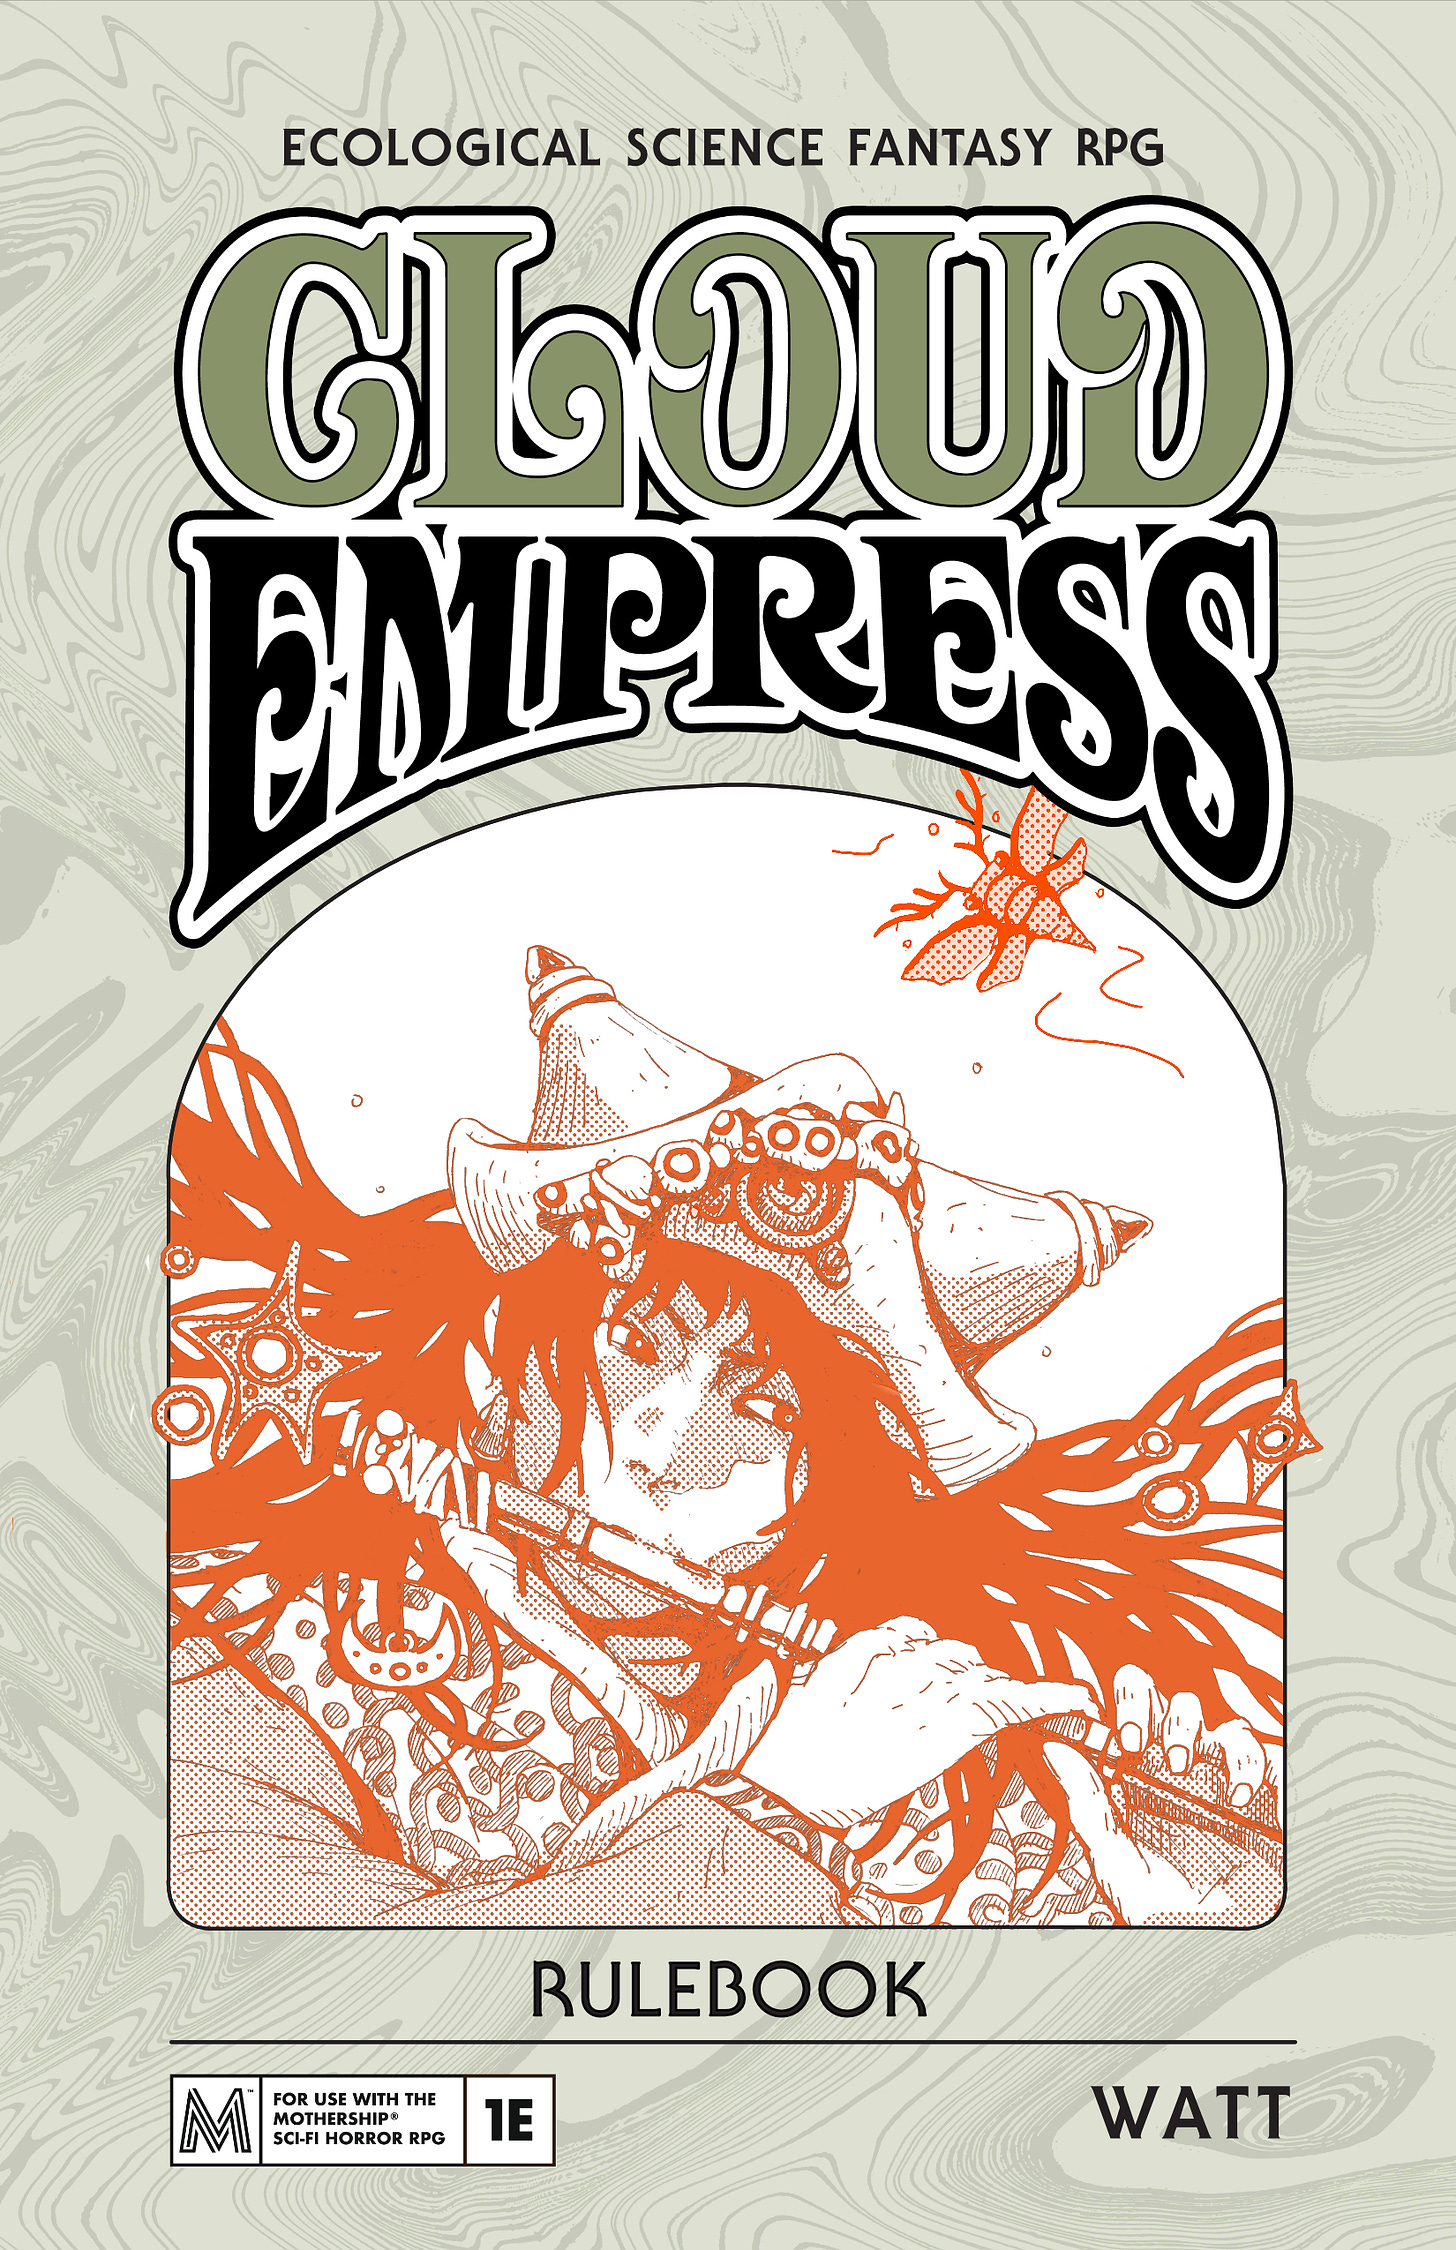 The cover art for the rulebook of Cloud Empress. The title is in large letters at the top, and below is a drawing of someone playing a wind instrument.